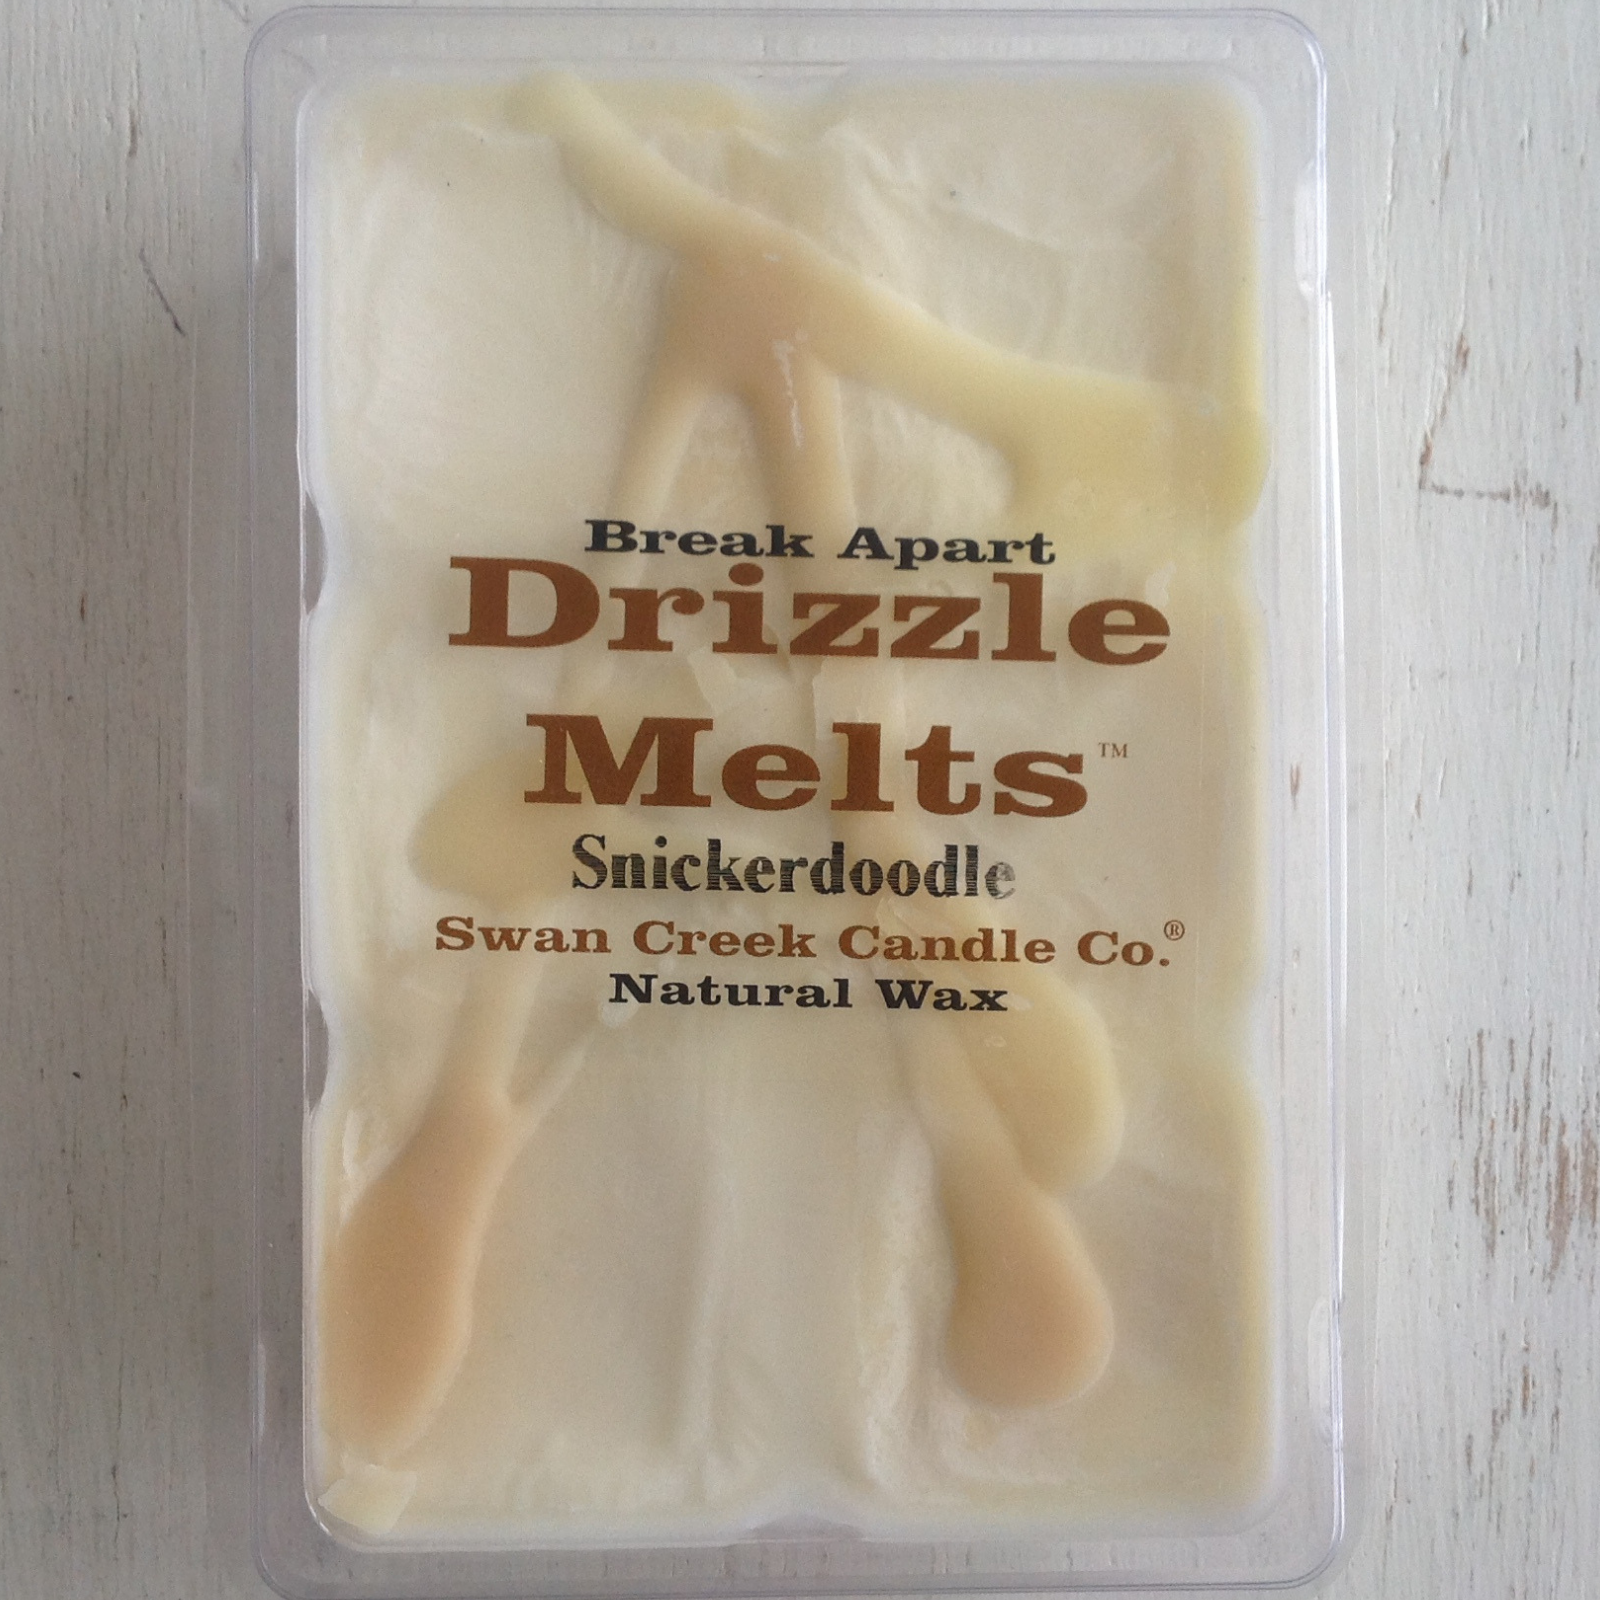 Swan Creek Candle Company Herbal Drizzle Wax Melts Snickerdoodle